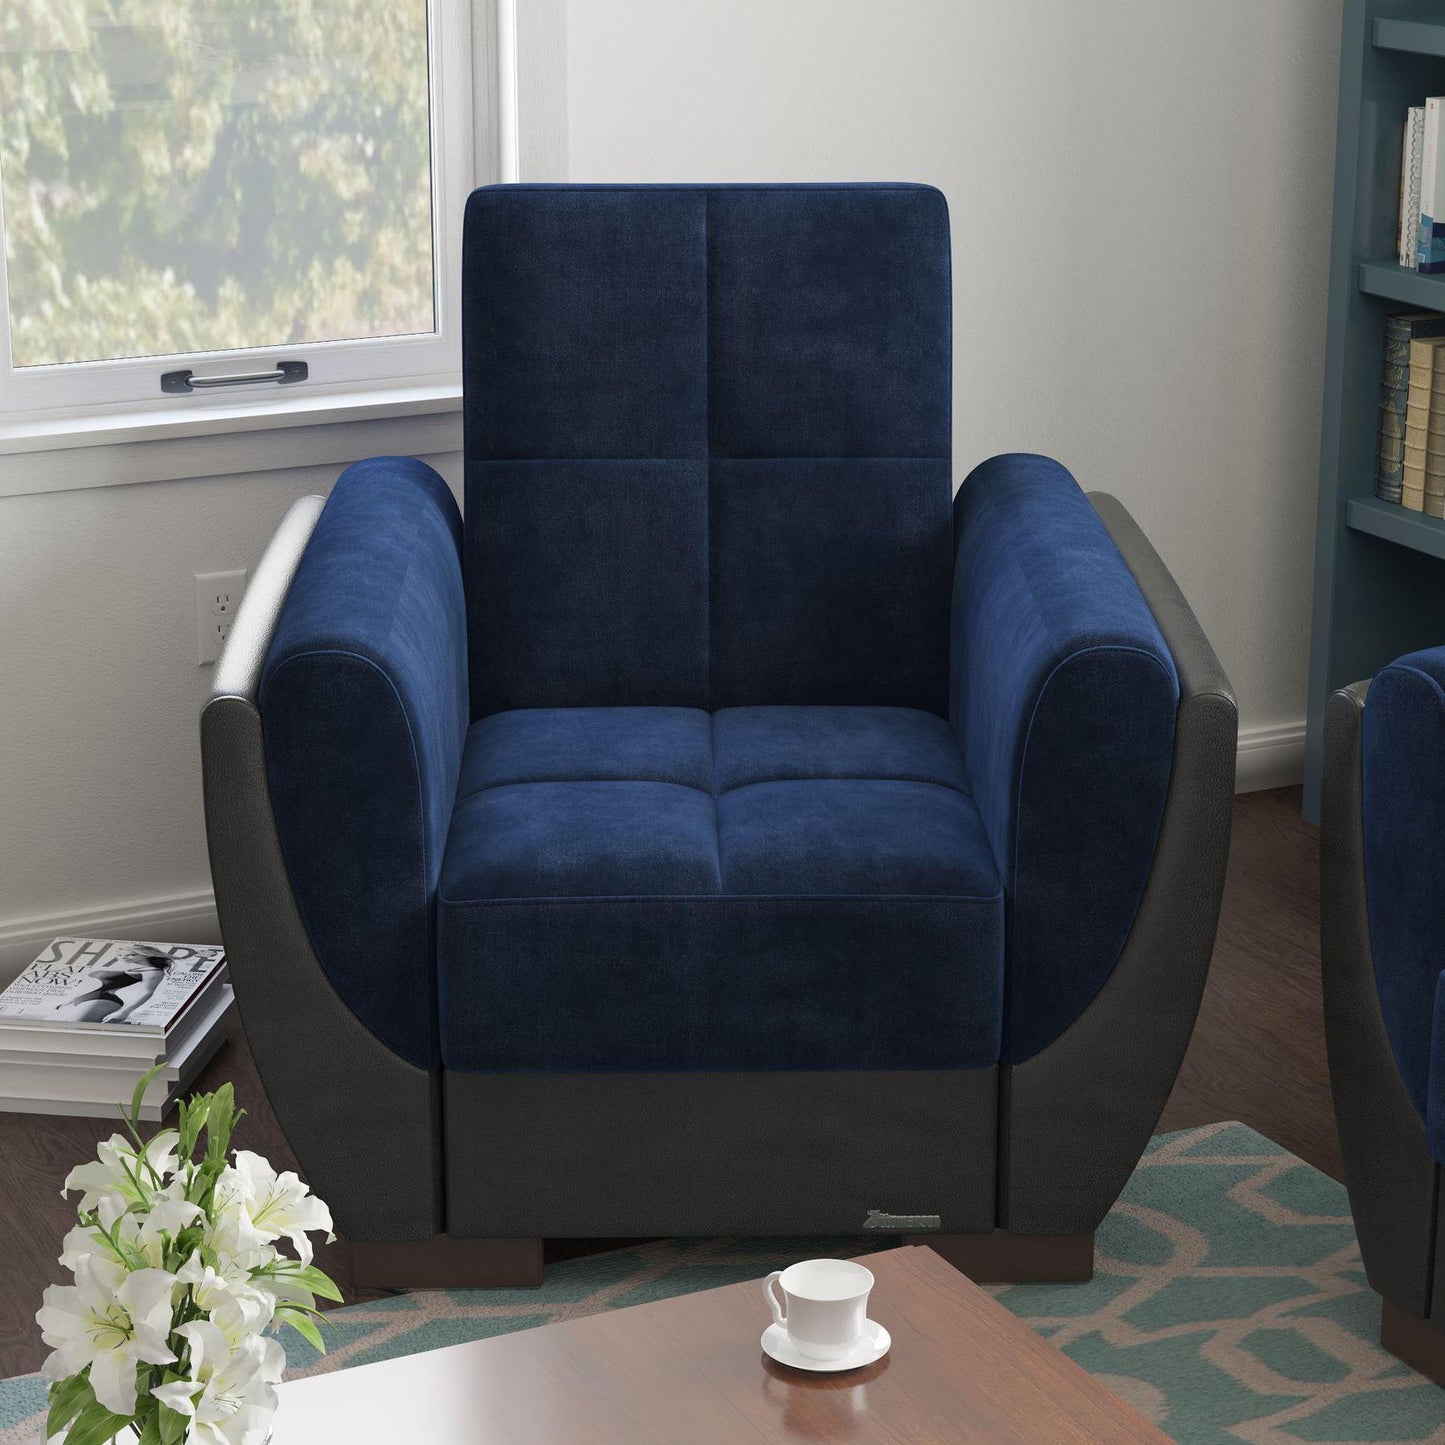 Modern design, Snorkel Blue, Black , Microfiber, Artificial Leather upholstered convertible Armchair with underseat storage from Voyage Shelter by Ottomanson in living room lifestyle setting by itself. This Armchair measures 42 inches width by 36 inches depth by 41 inches height.